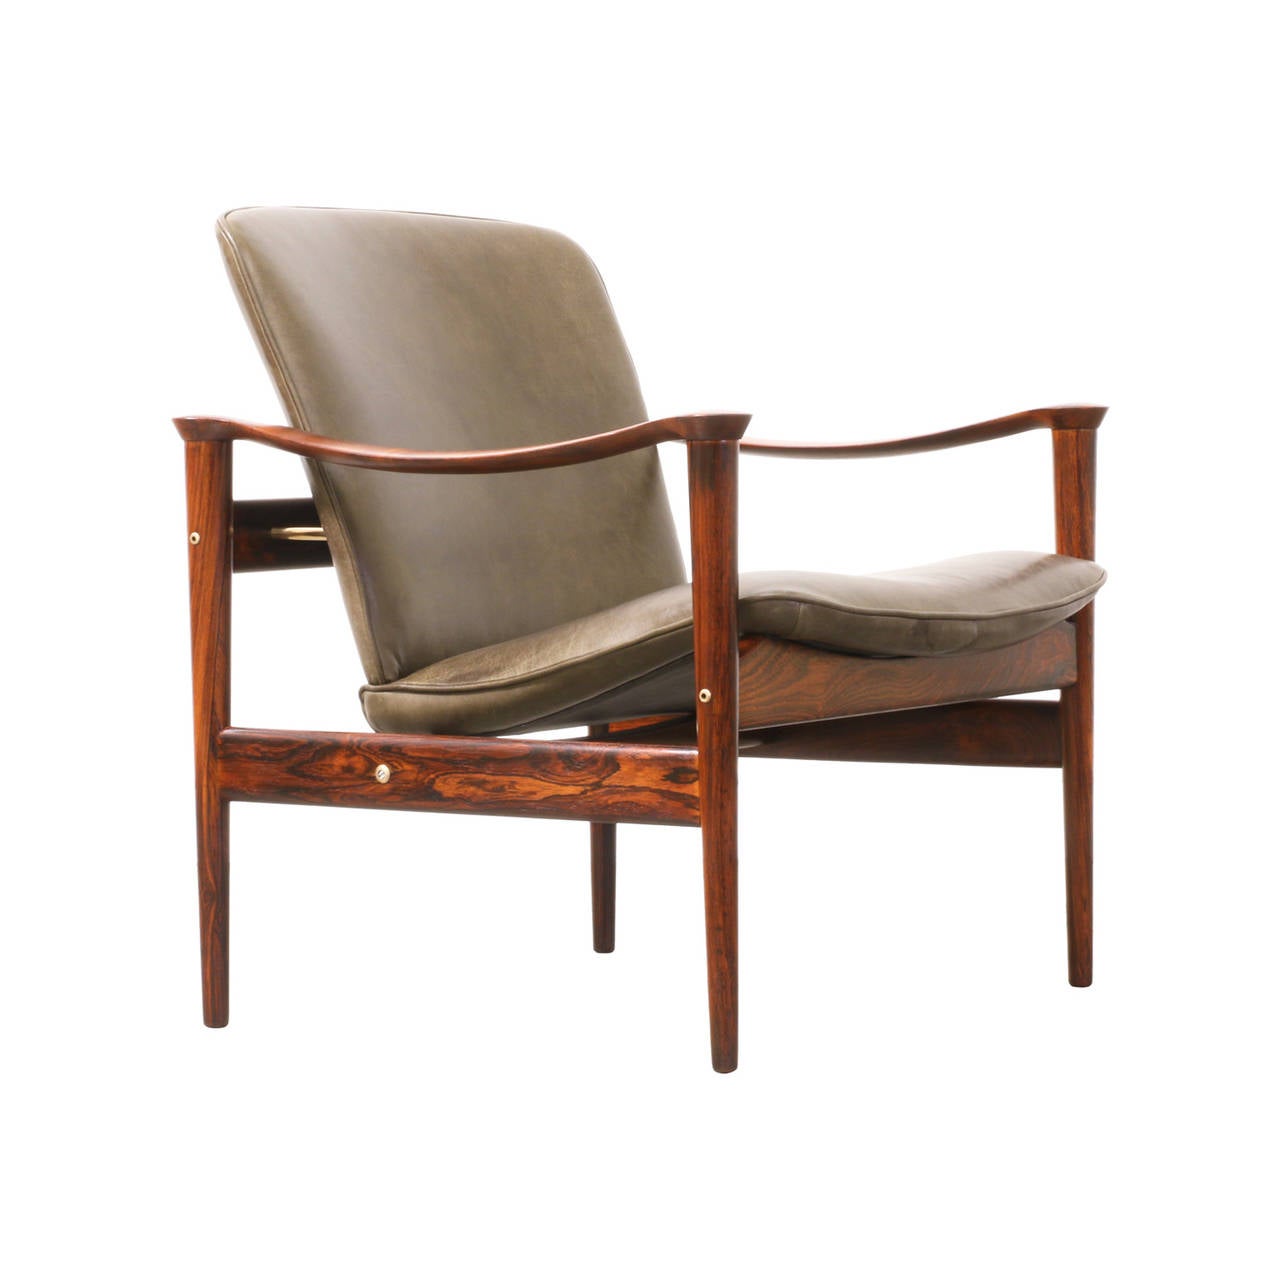 Designer: Fredrik Kayser.
Manufacturer: Vatne Lenestolfabrikk.
Period/Style: Norwegian Modern.
Country: Norway.
Date: 1960s.


Dimensions: 29.75″ H x 27.25″ W x 27″ D.
Seat height: 16.5″.
Materials: Rosewood, leather, brass.
Condition: